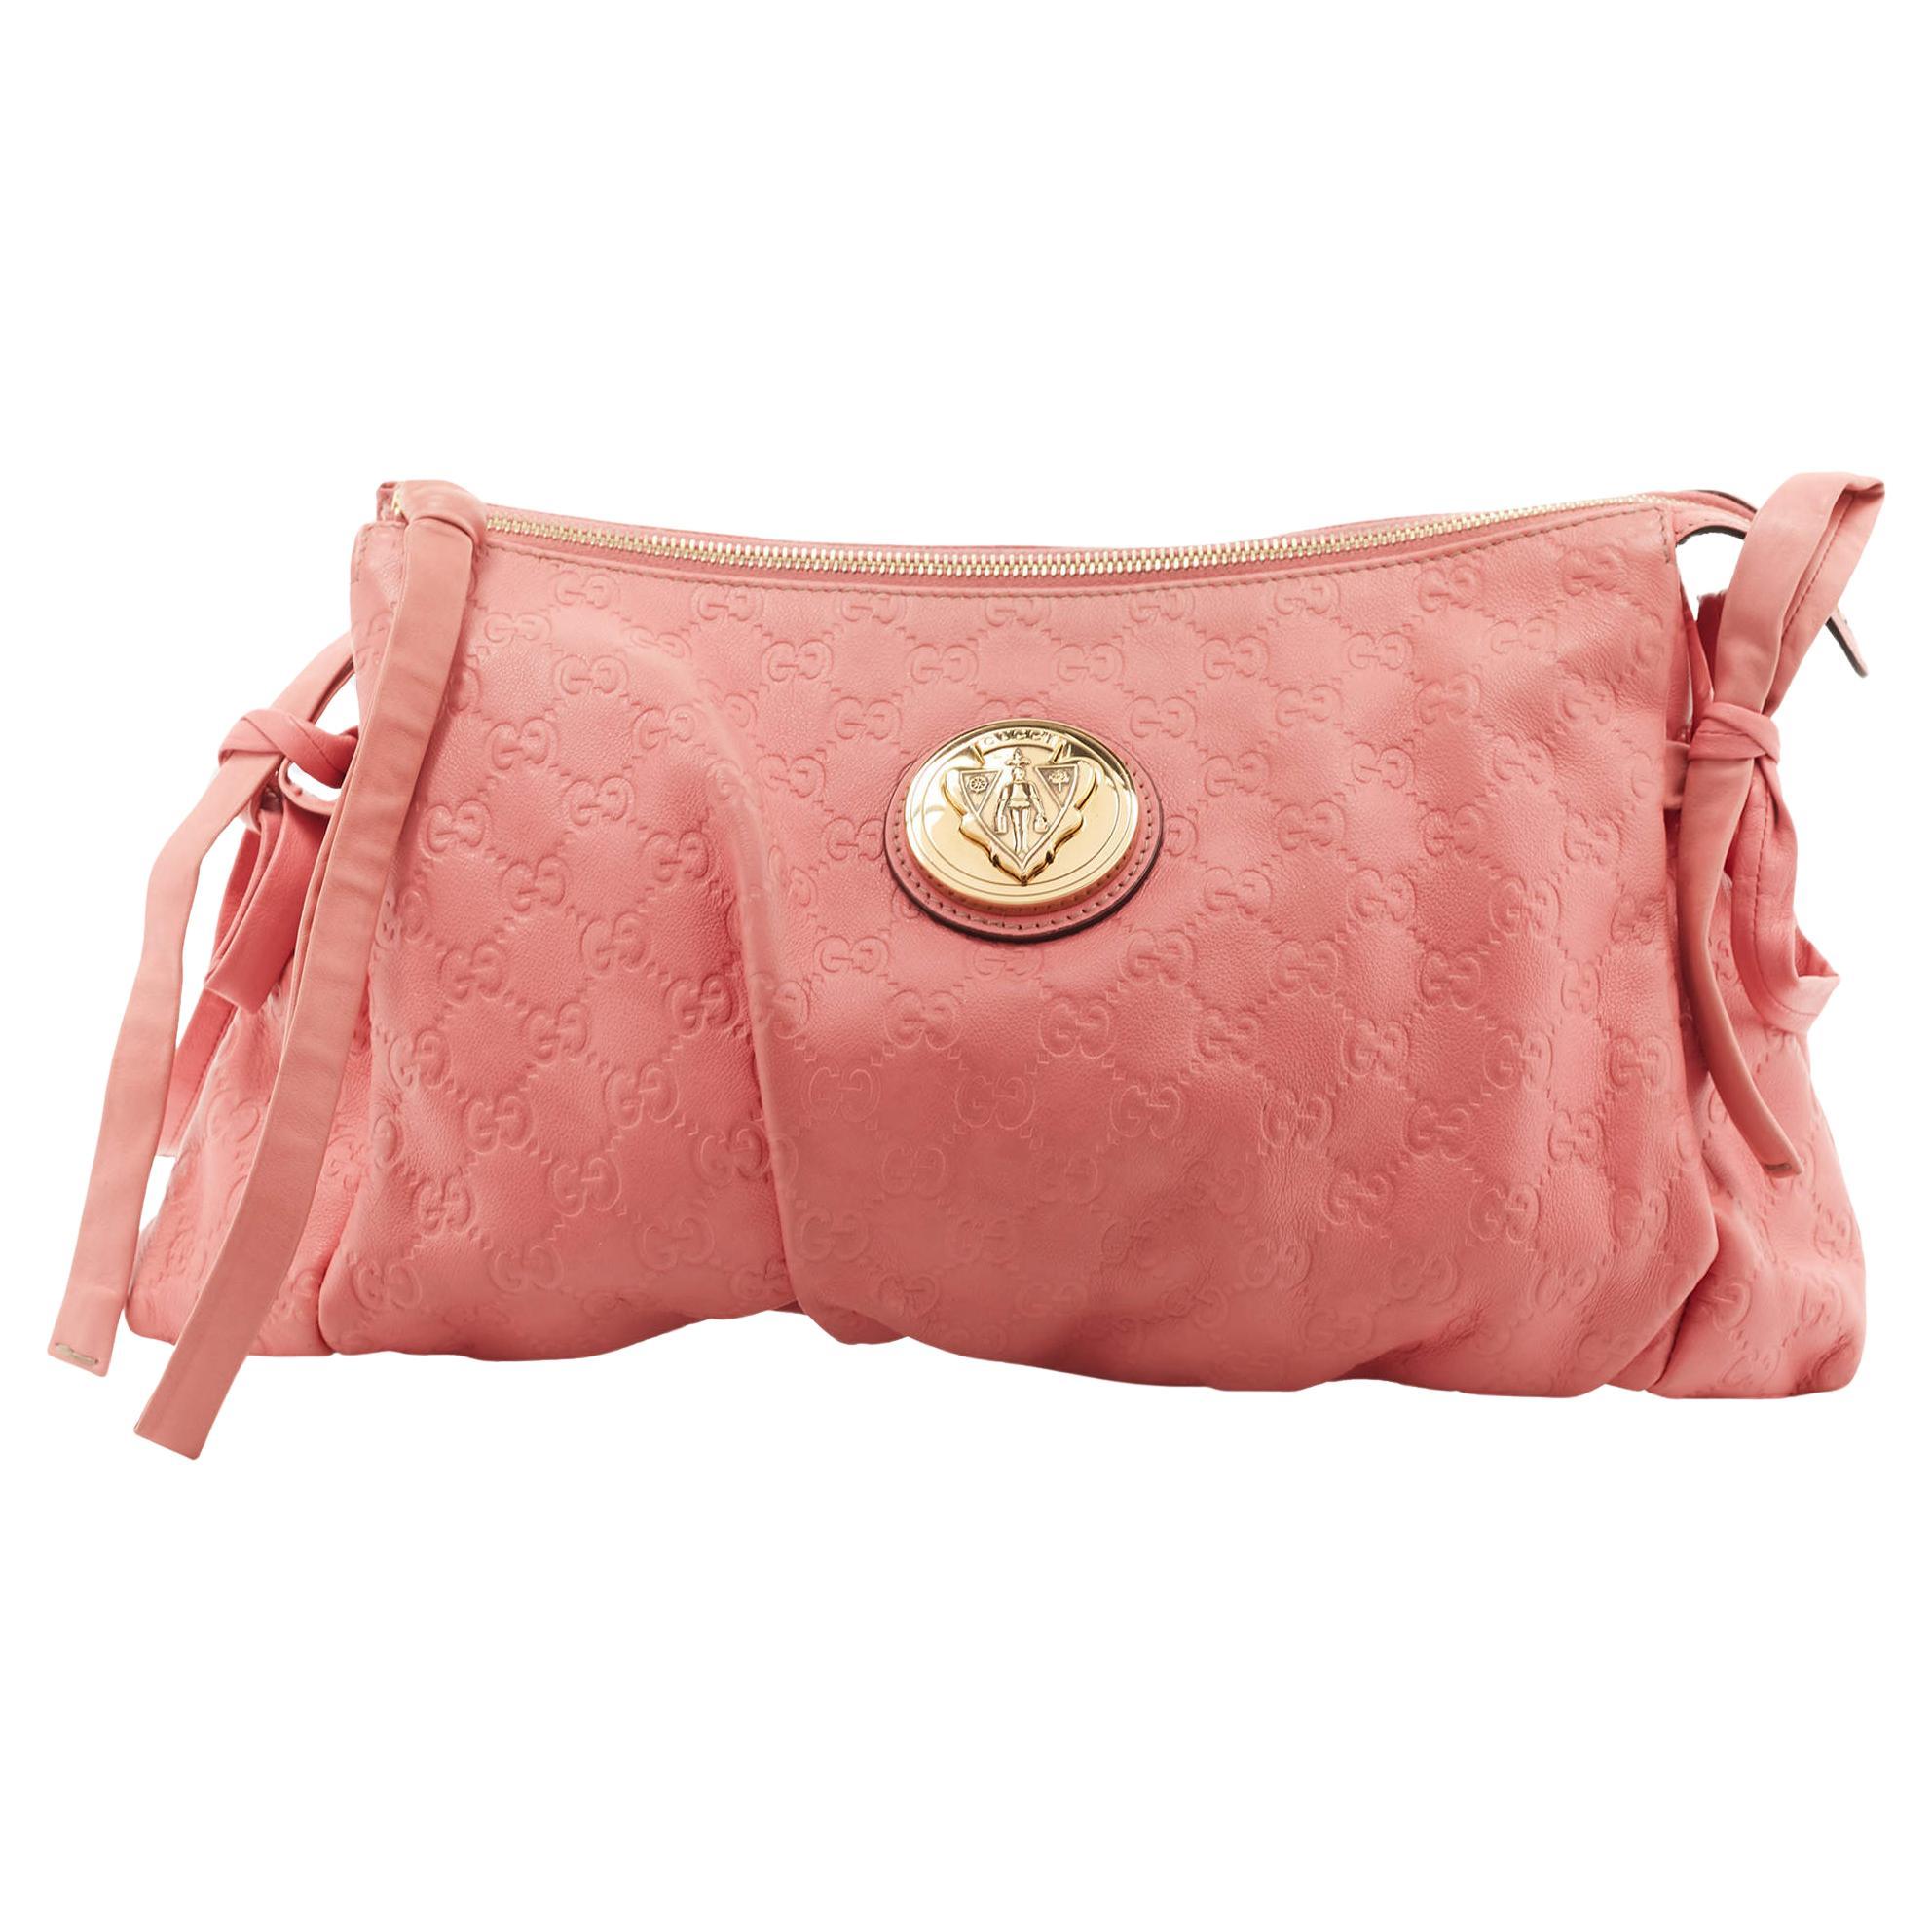 Gucci Pink Guccissima Leather Large Hysteria Wristlet Clutch